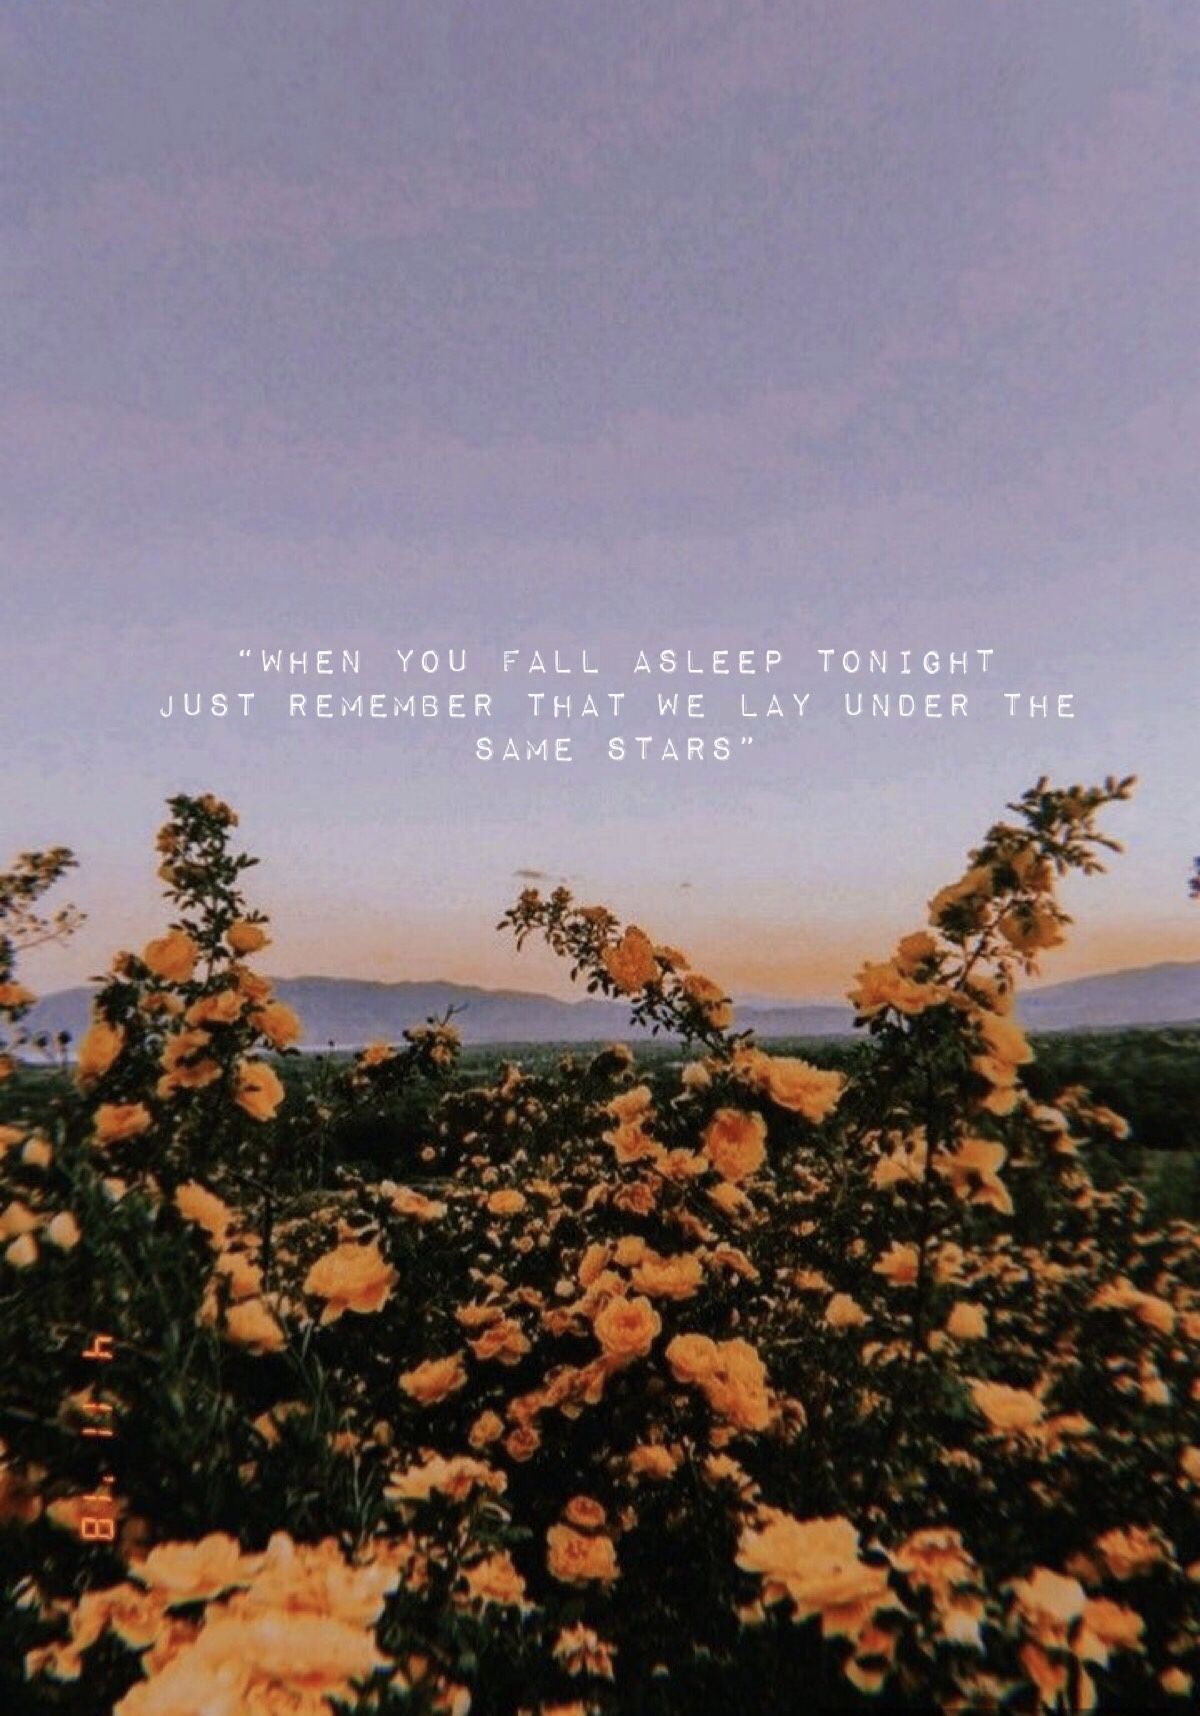 Aesthetic Quotes Tumblr Wallpapers